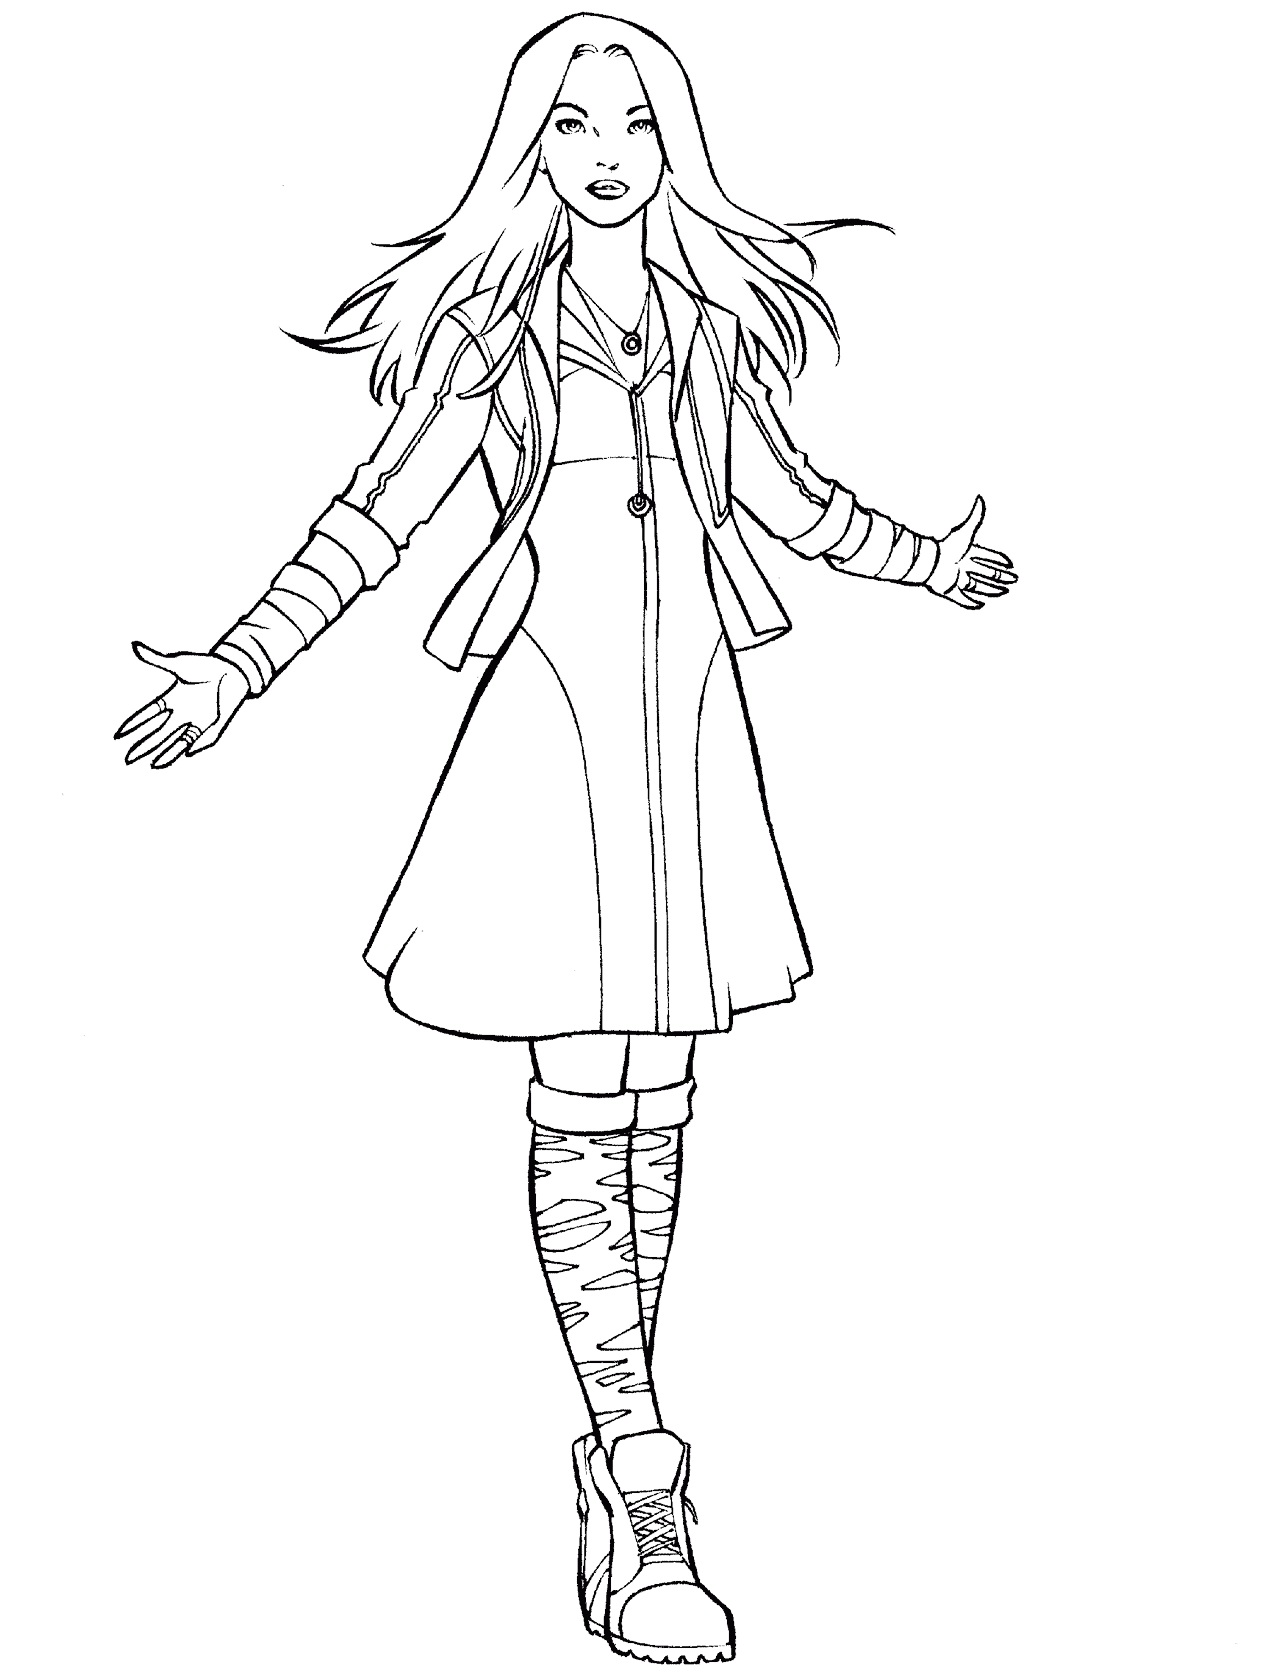 Scarlet Witch Avengers 2 Coloring Pages